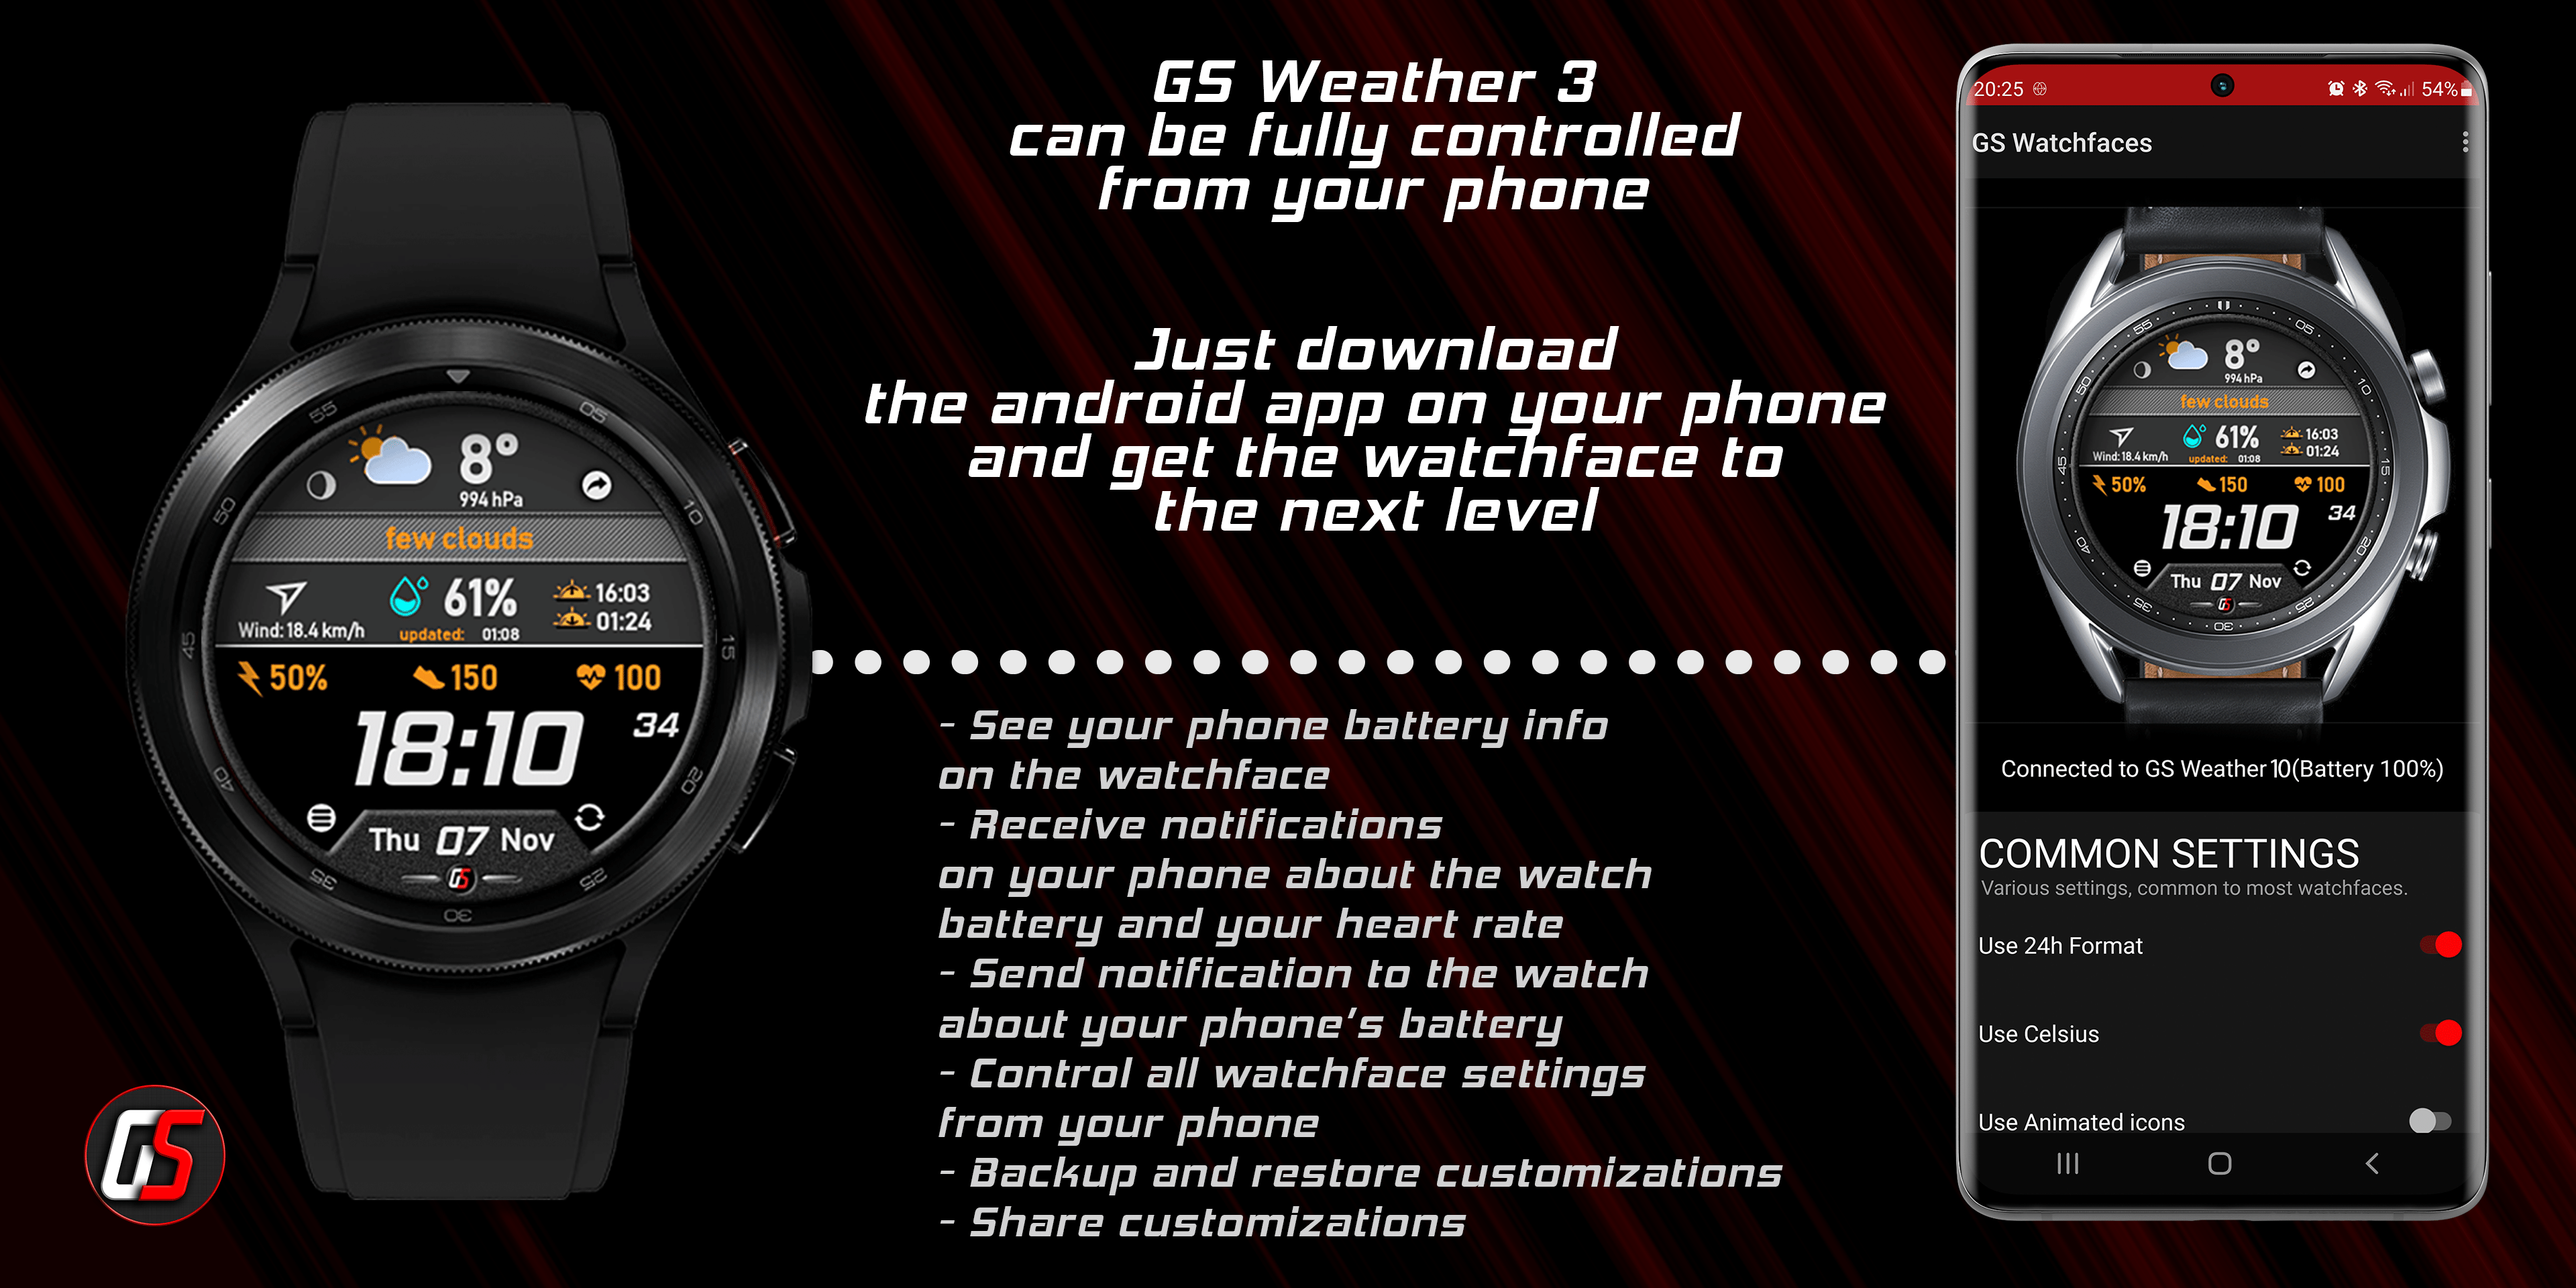 GS Weather 3 now connects to GS Watchfaces companion app